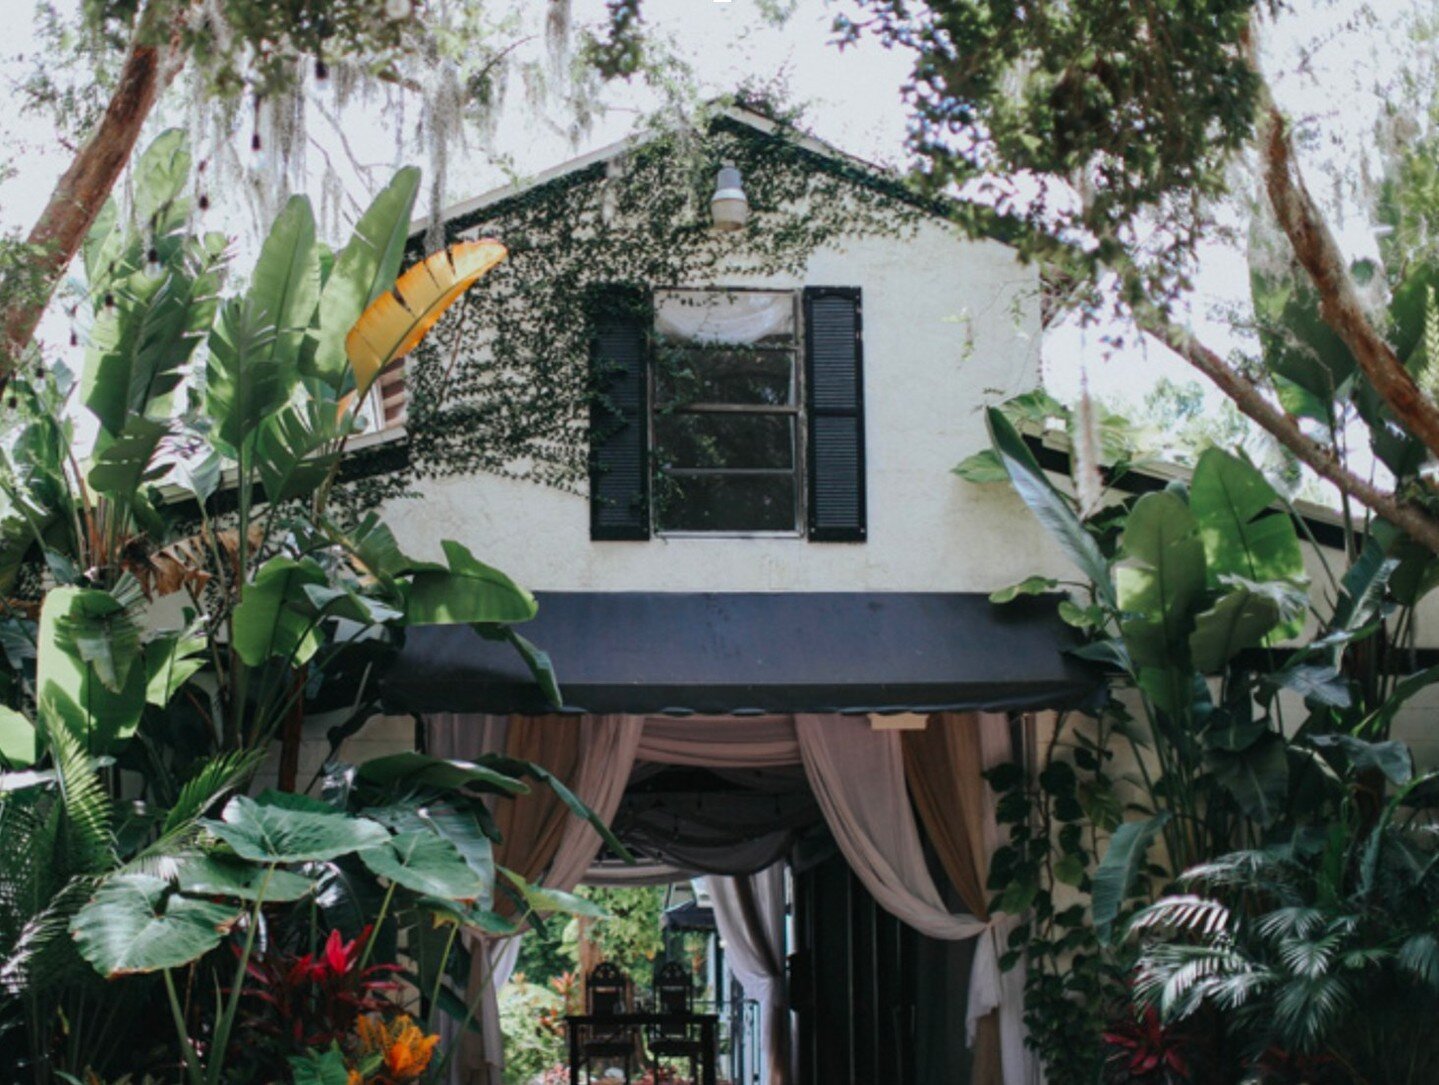 Looking for the perfect venue? We have a guide for that. ⁠
Click on this post in our bio for help narrowing down your search.⁠
⁠
#floridawedding #flwedding⁠
⁠
Or visit via original link: https://saltblockhospitality.com/sb-blog/the-perfect-venue